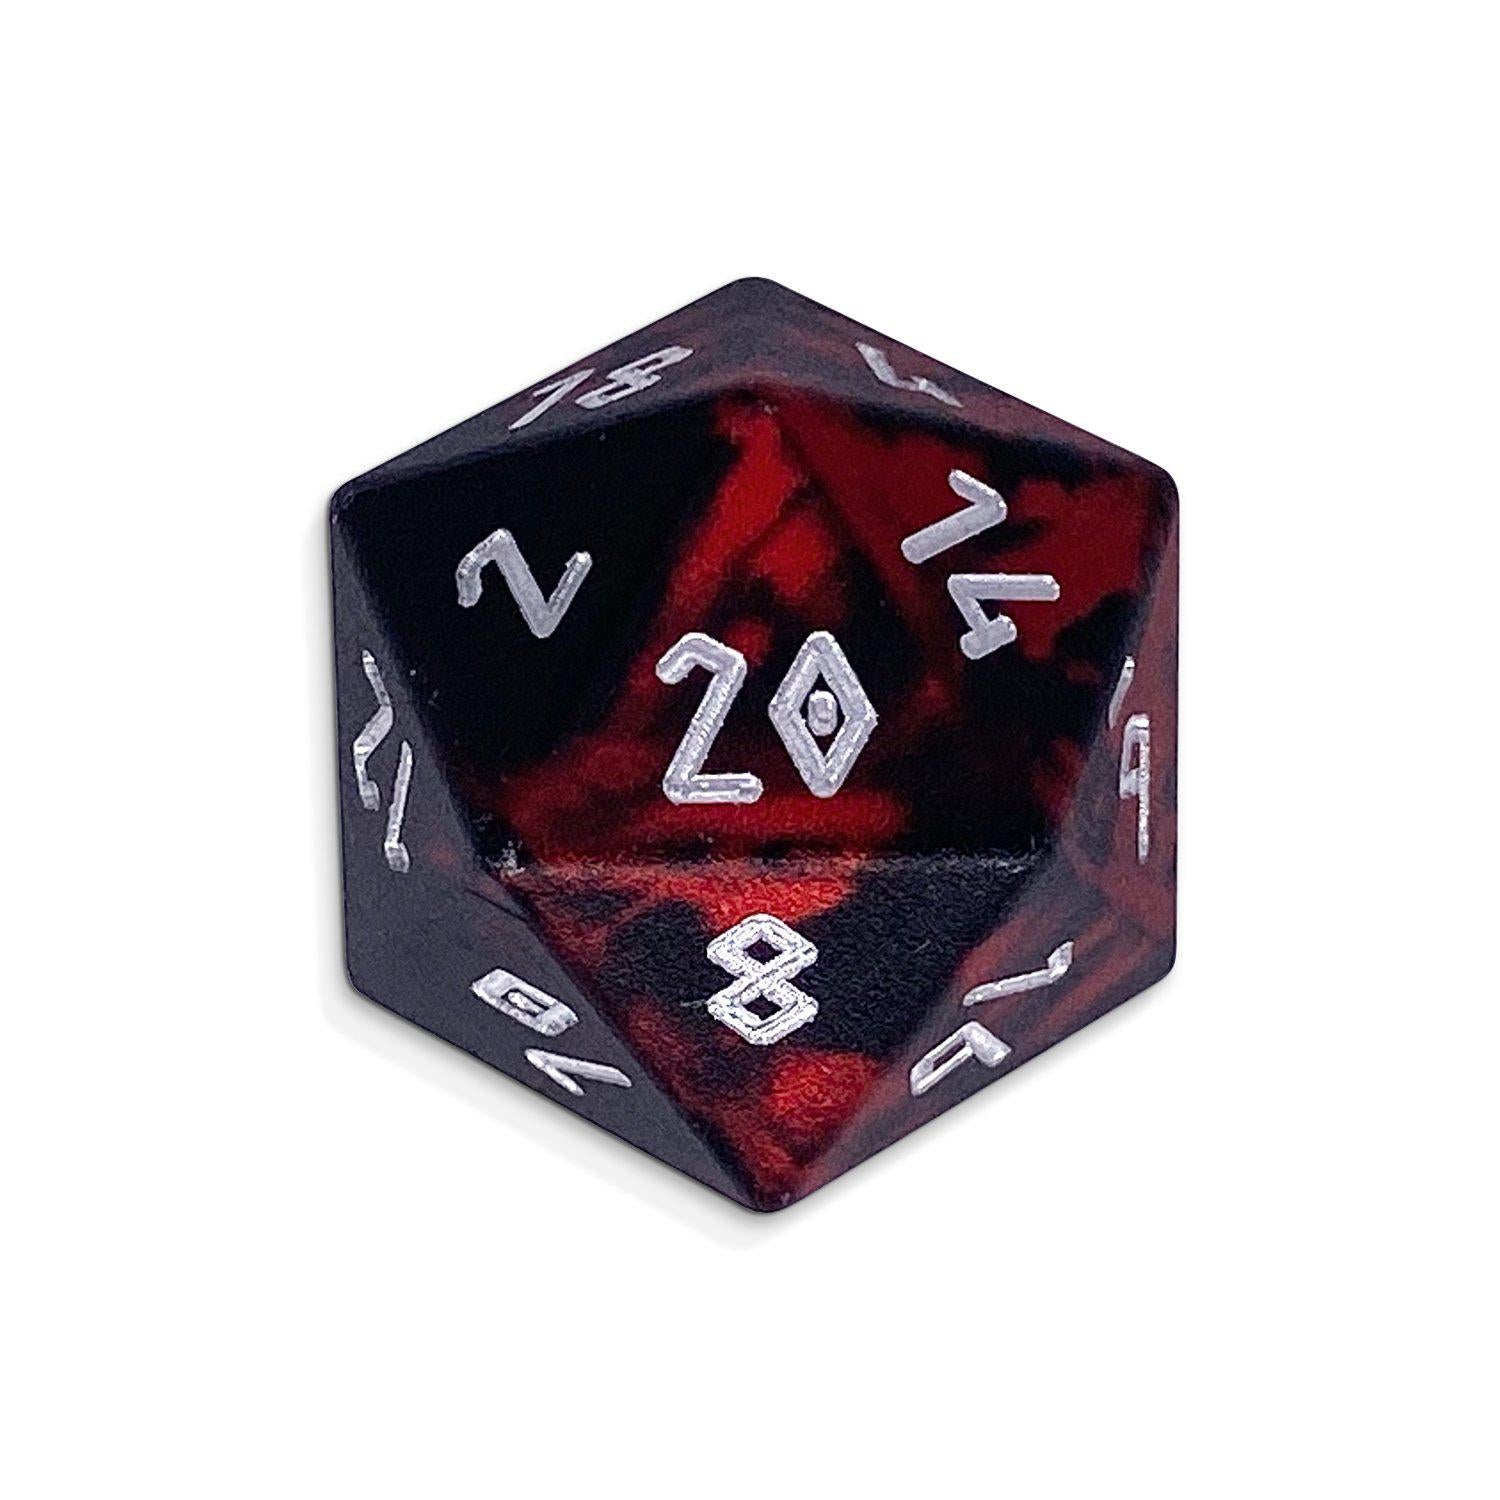 Single Wondrous Dice® D20 in Demon's Blood by Norse Foundry 6063 Aircraft Grade Aluminum